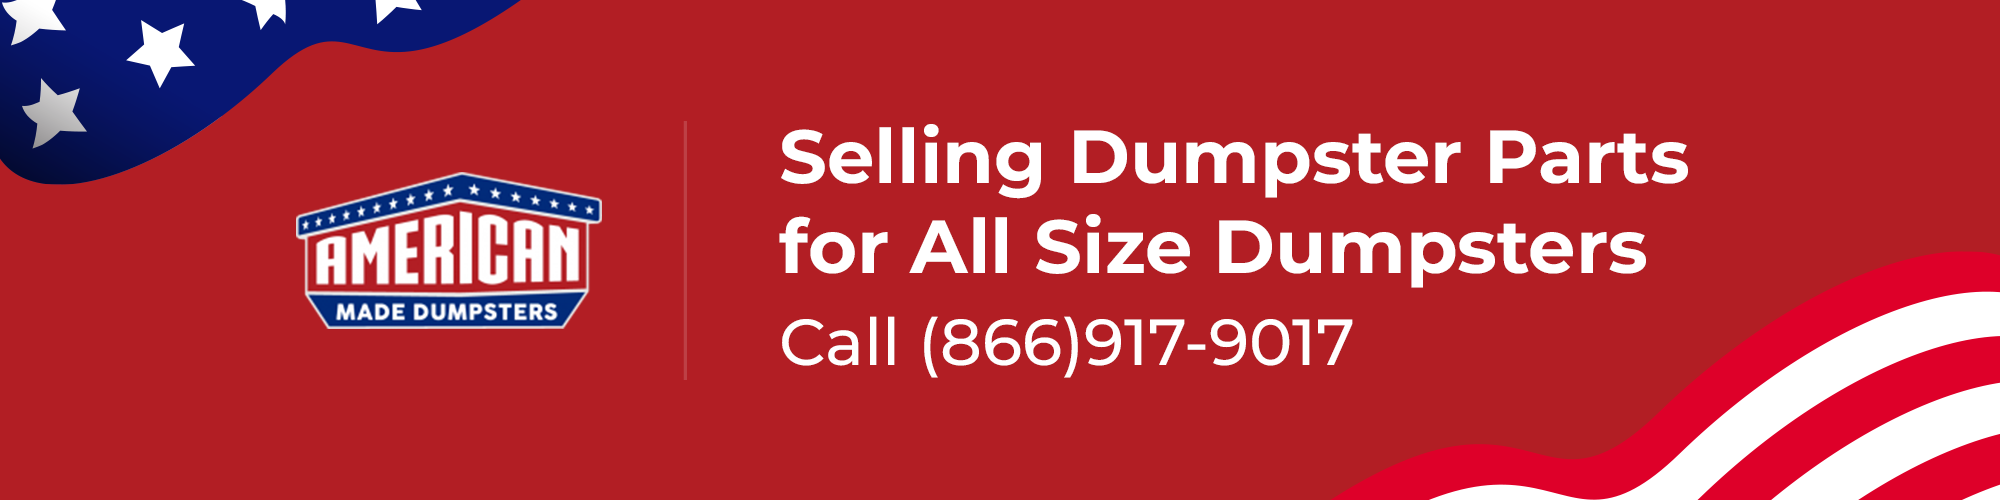 #23748 - Banner Ad for American Made Dumpsters